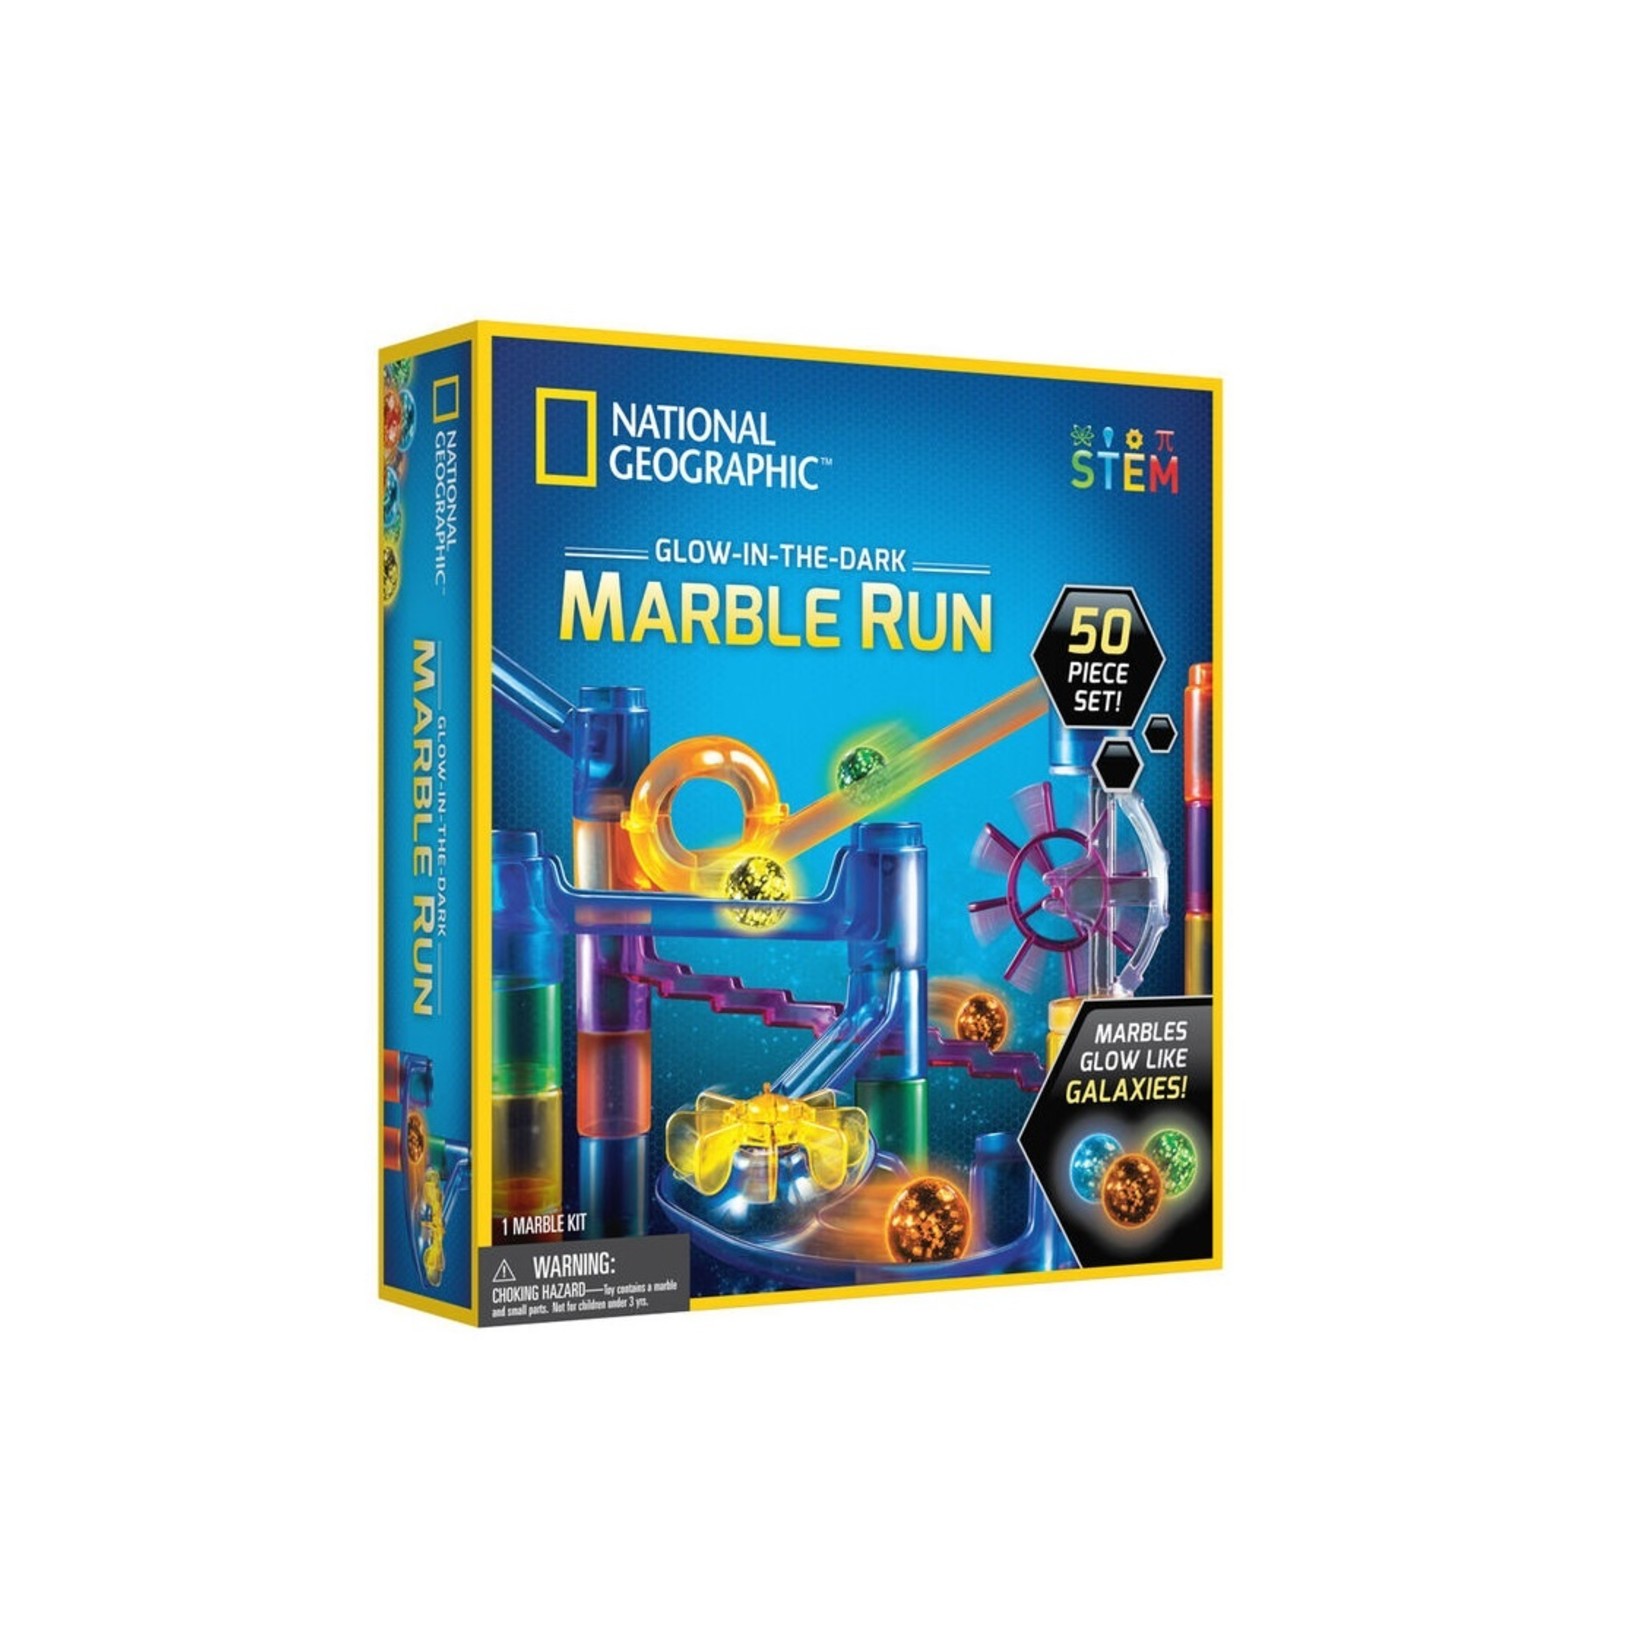 National Geographic National Geographic - 50 pc Glow-in-the-Dark Marble Run (Multilingue)